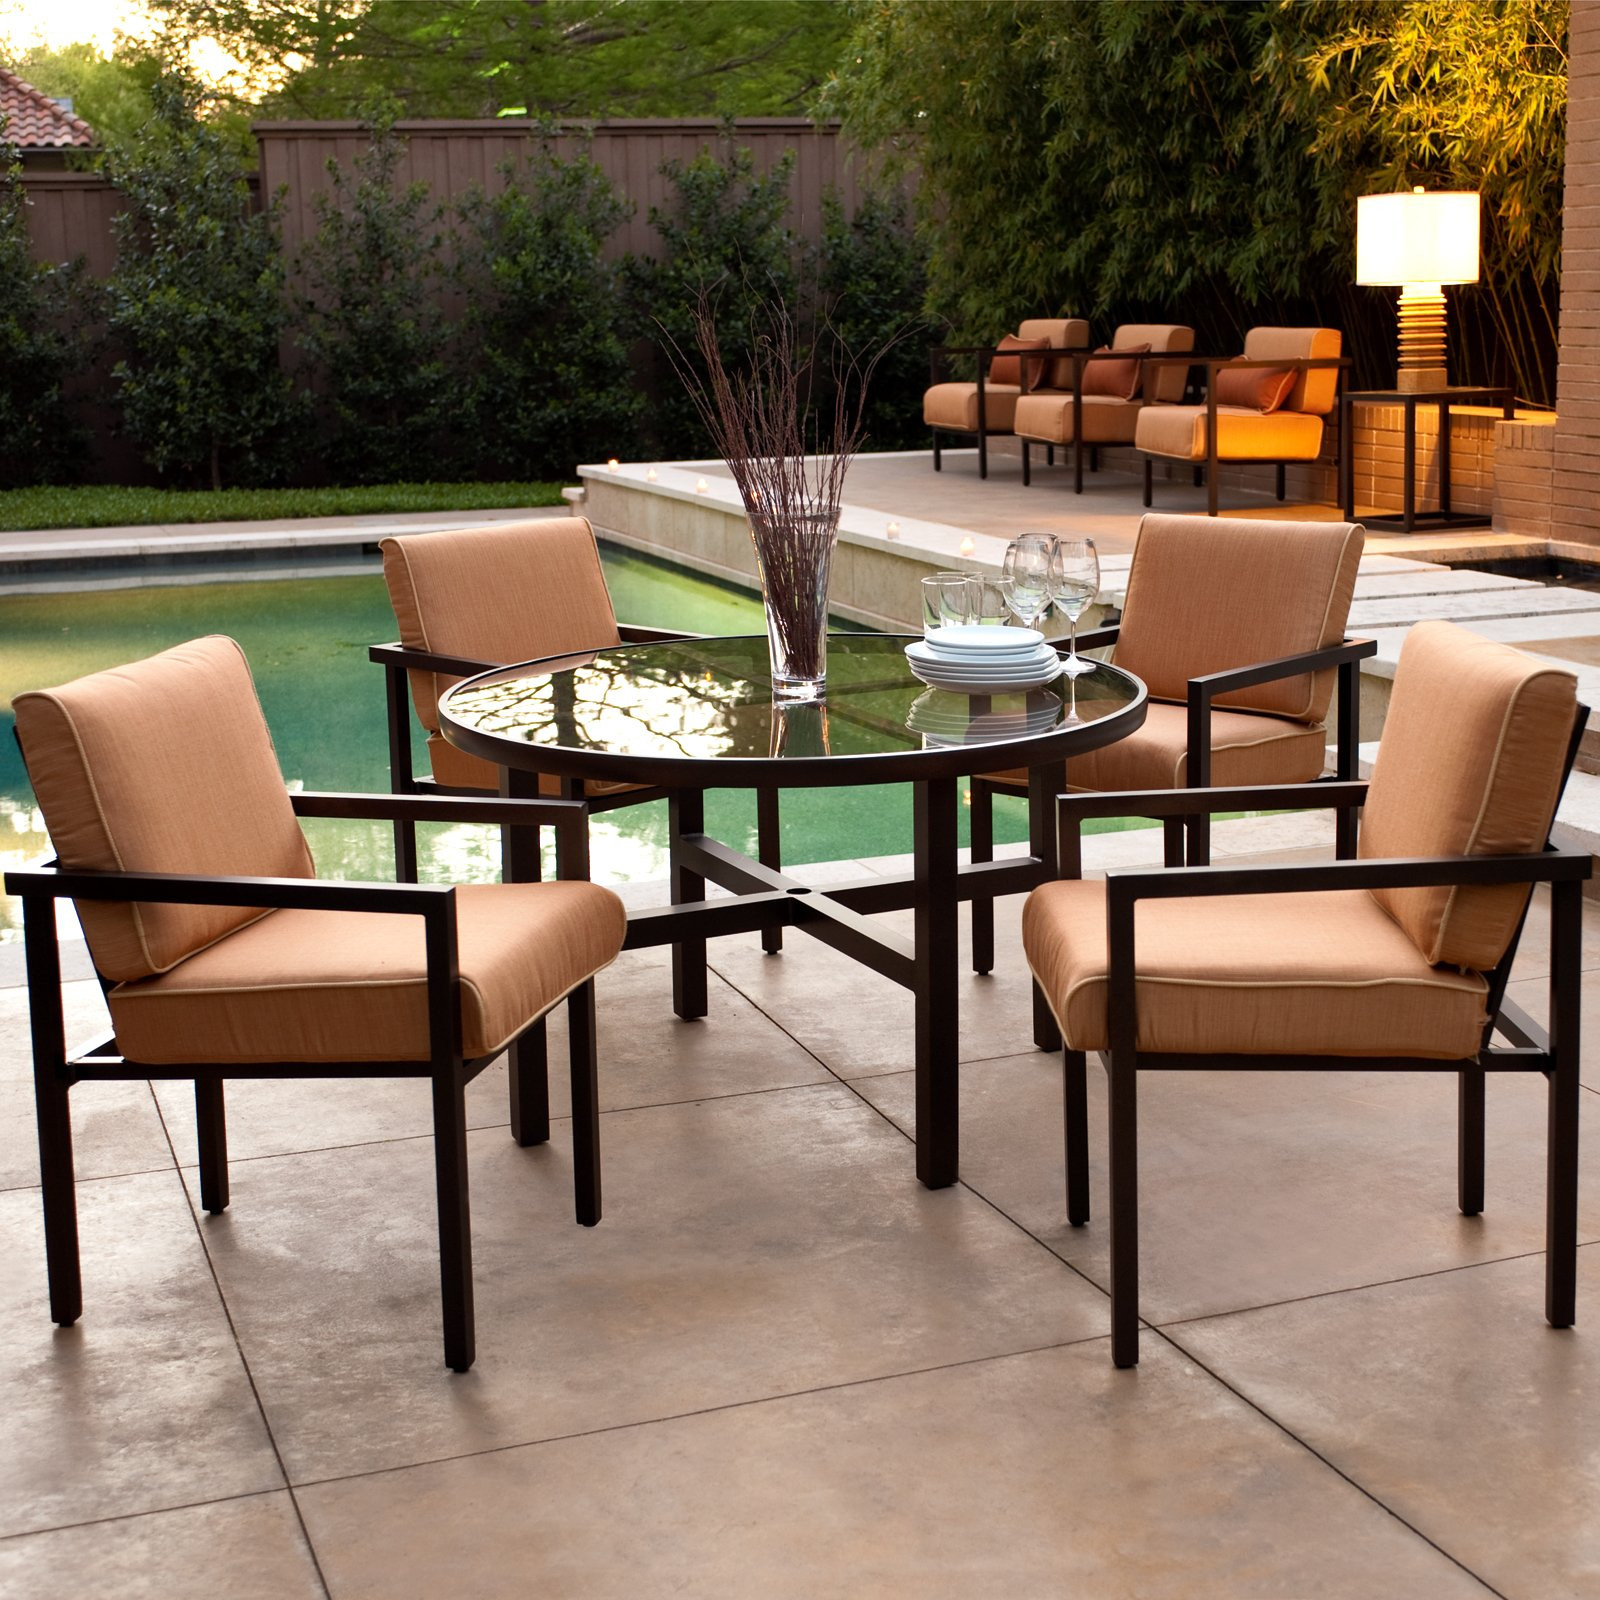 Backyard Furniture Sets
 Places To Go For Affordable Modern Outdoor Furniture